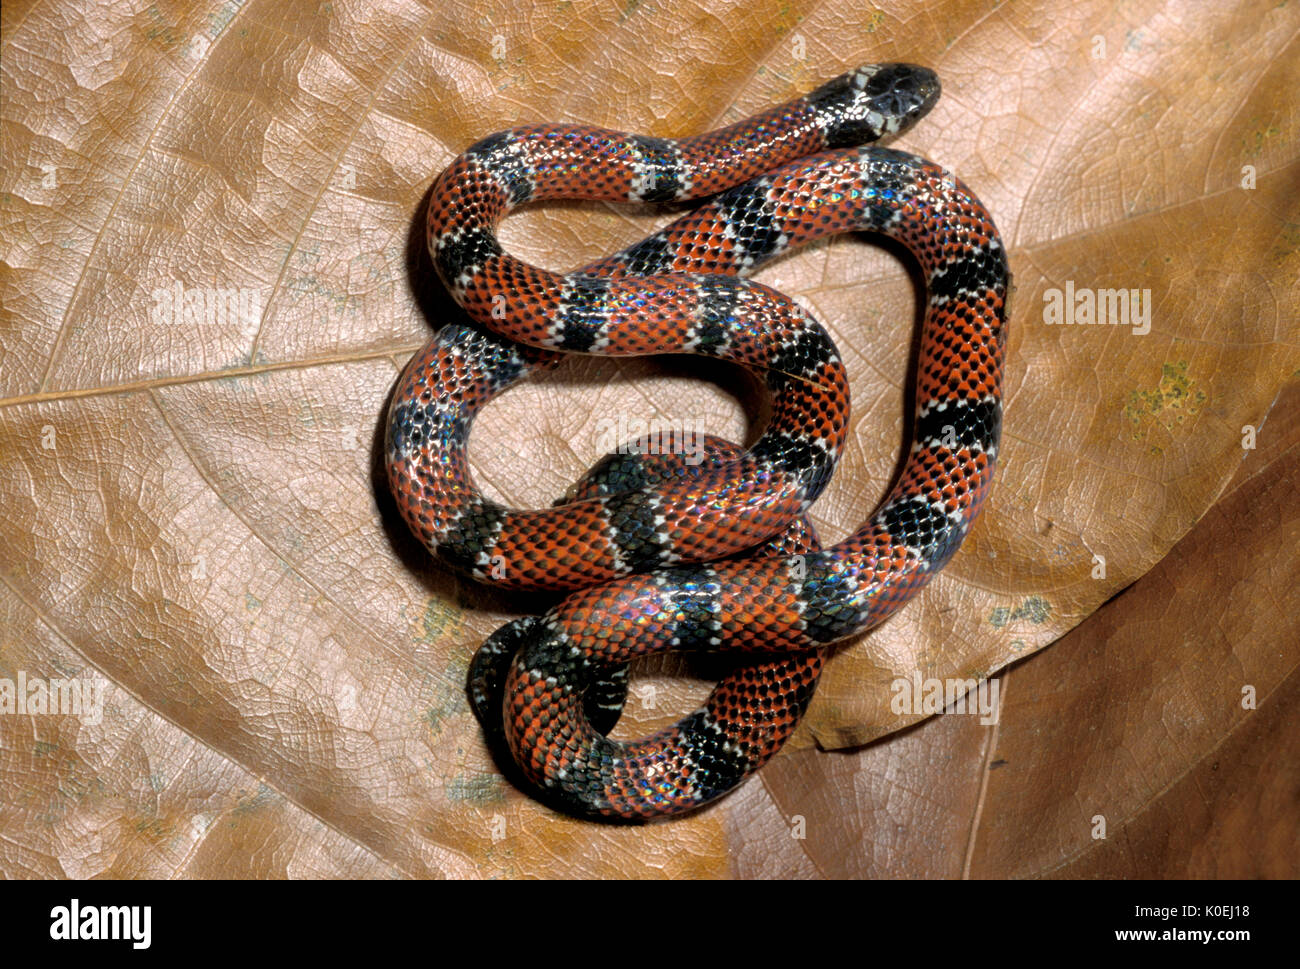 Coral Snake, Miccrurus corallinus, native to Brazil, Argentina, and Paraguay, venomous elapid snake, Painted coral snake captive, controlled situation Stock Photo